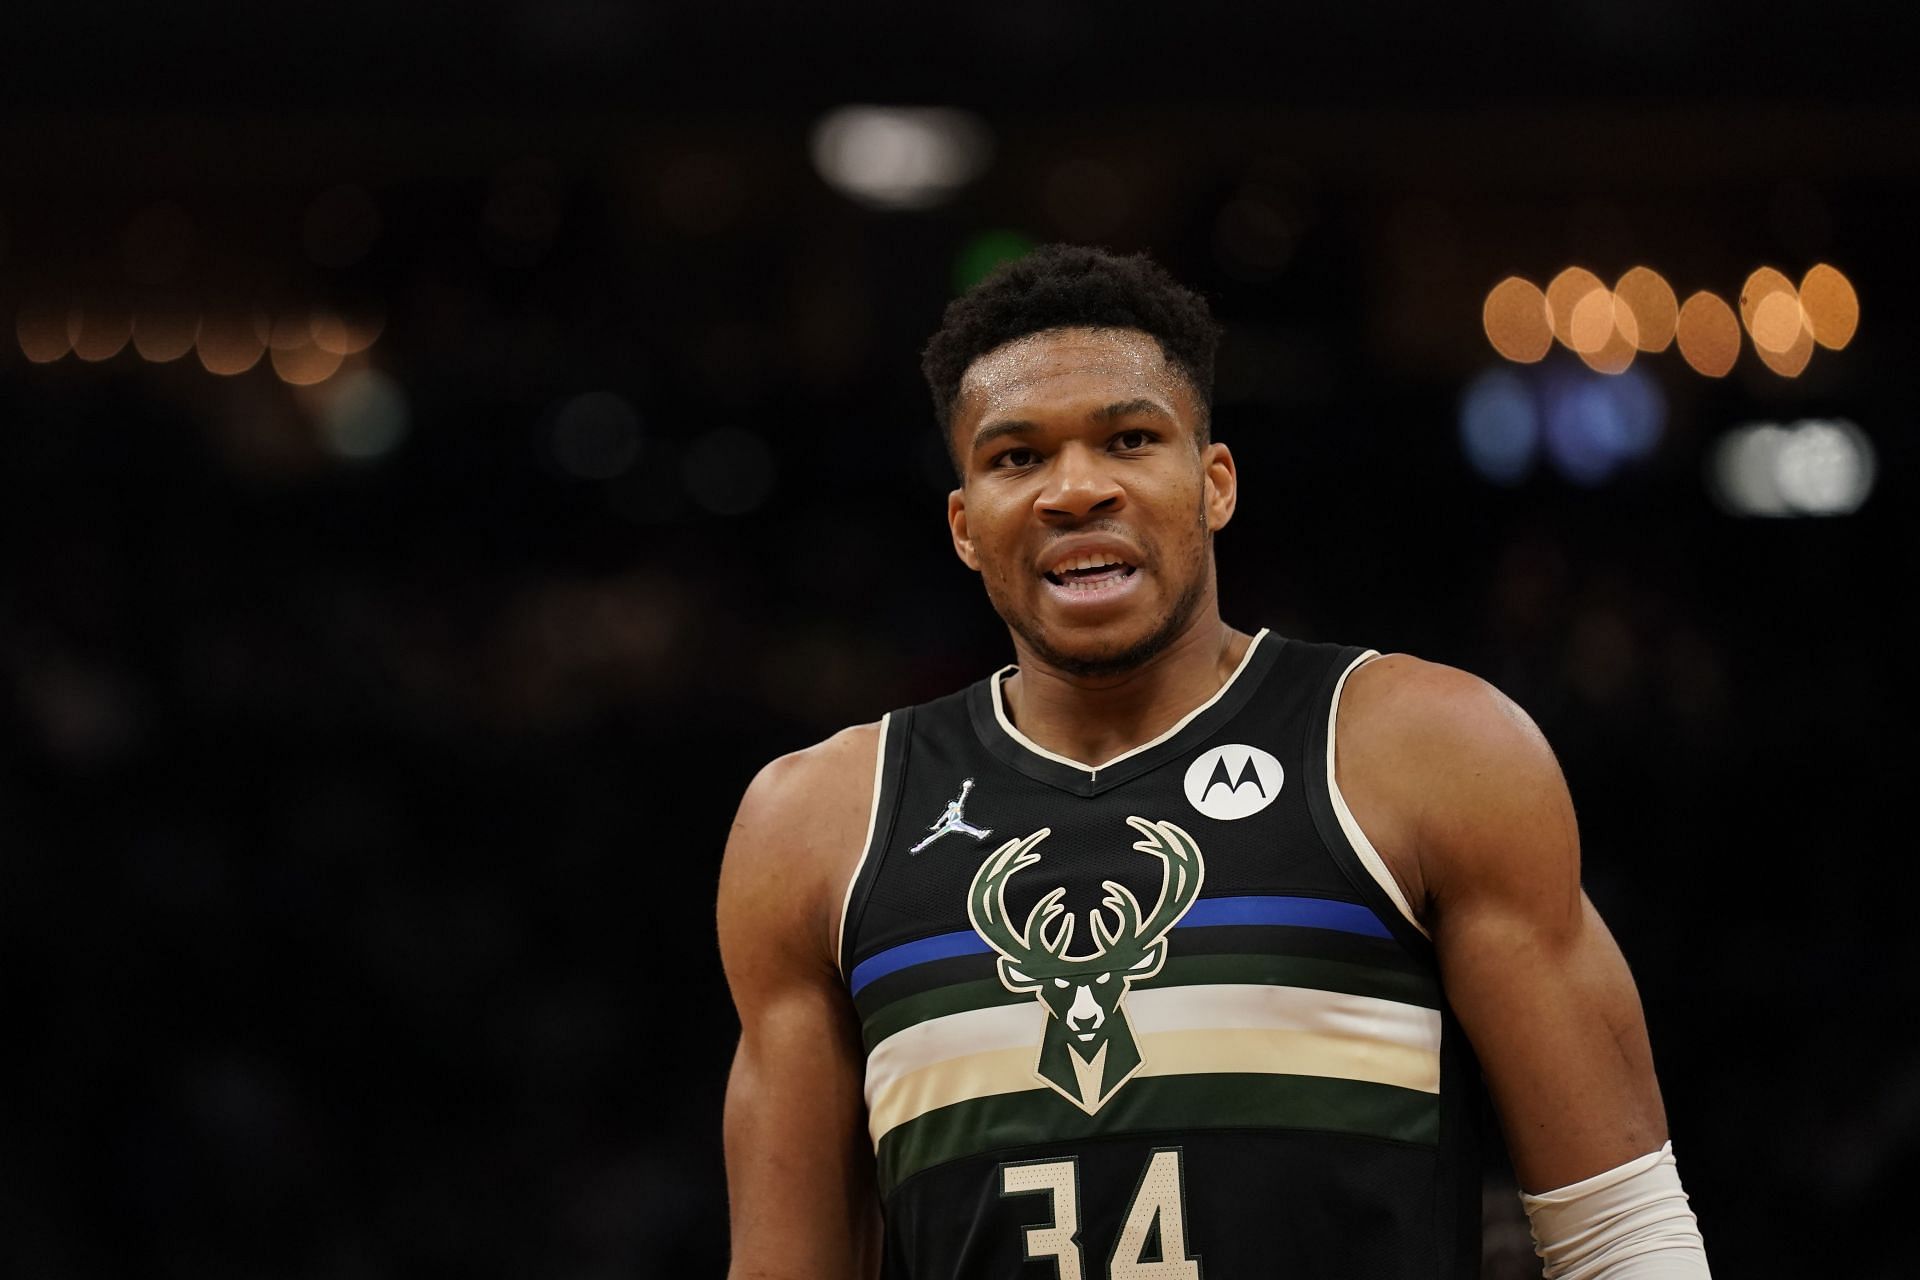 Giannis Antetokounmpo cannot afford to have an off-night for the Milwaukee Bucks